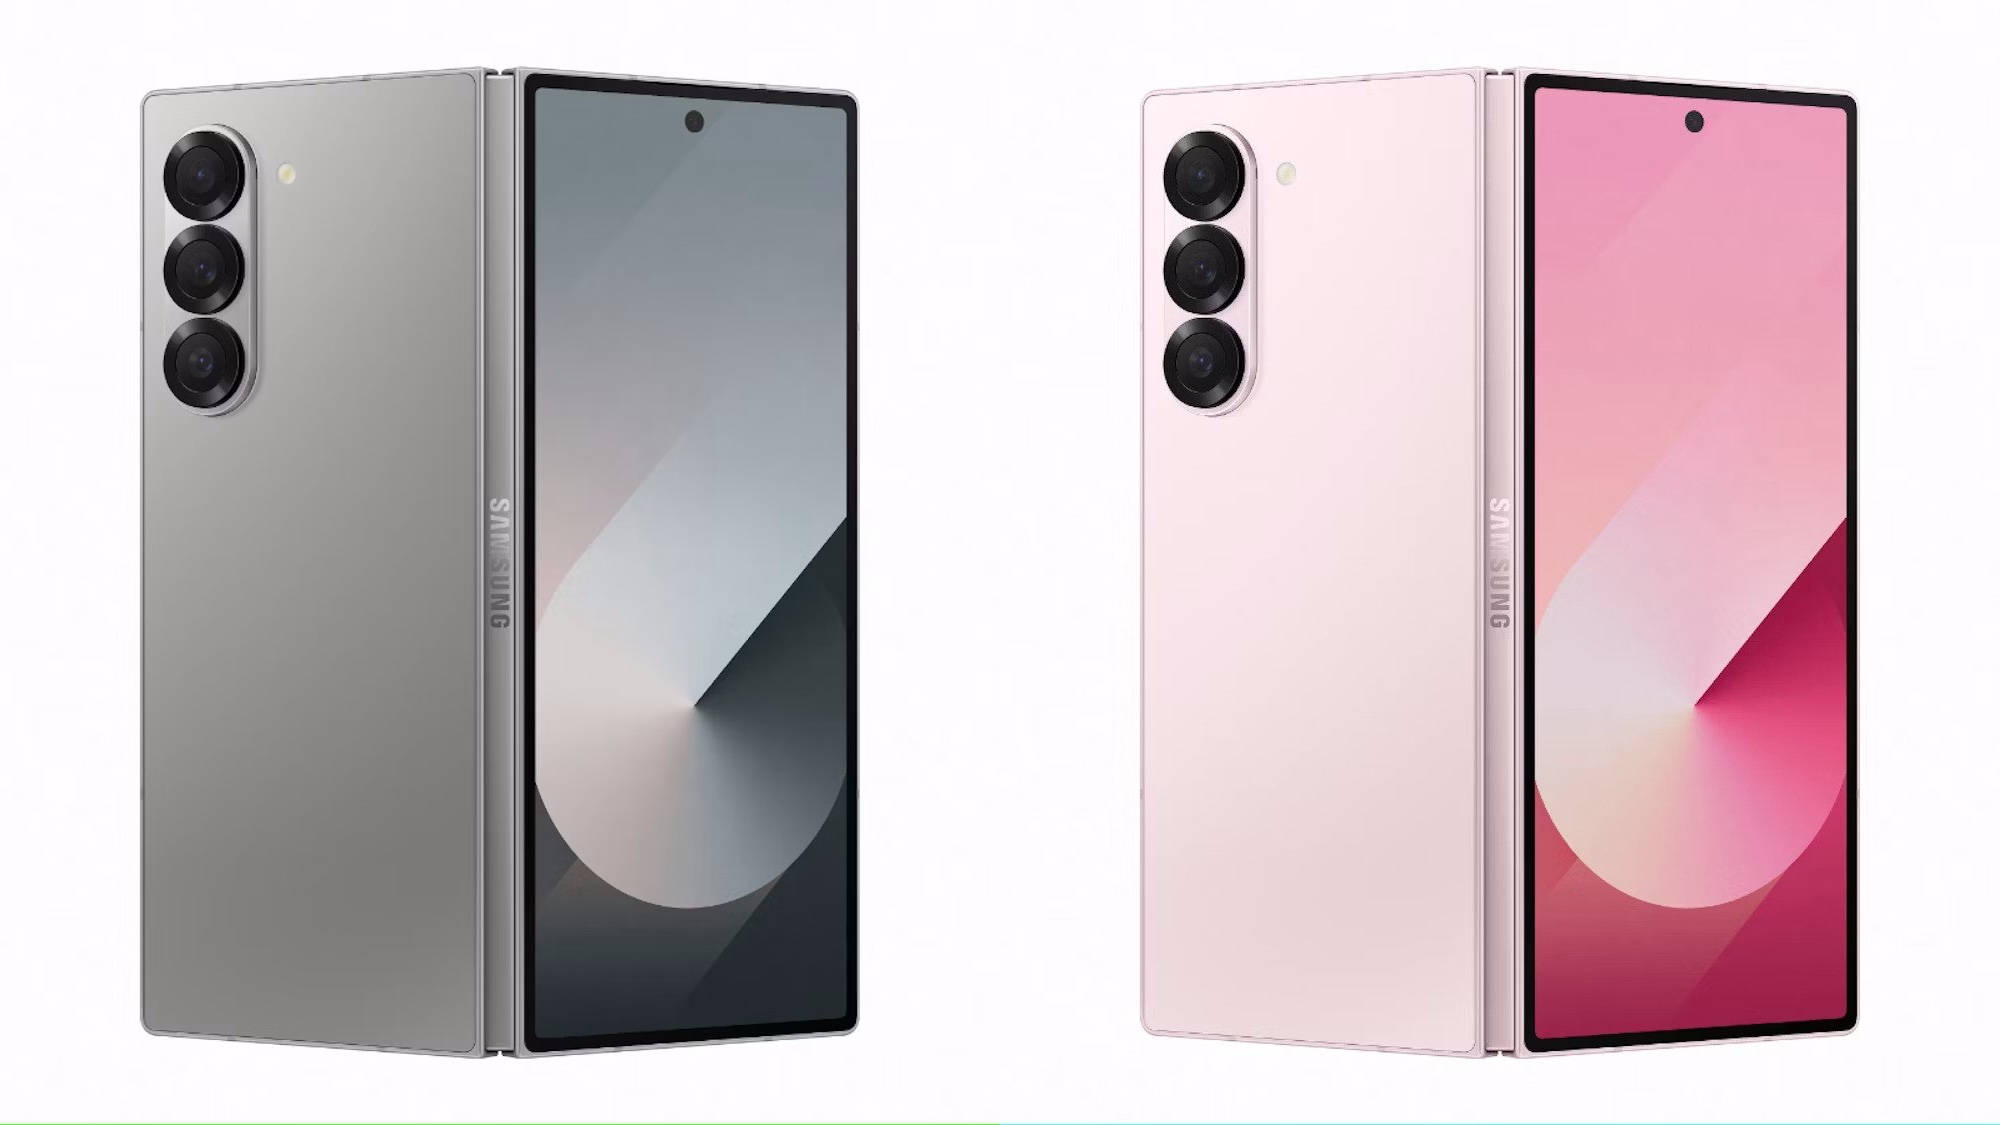 Galaxy Z Fold 6 in gray and pink